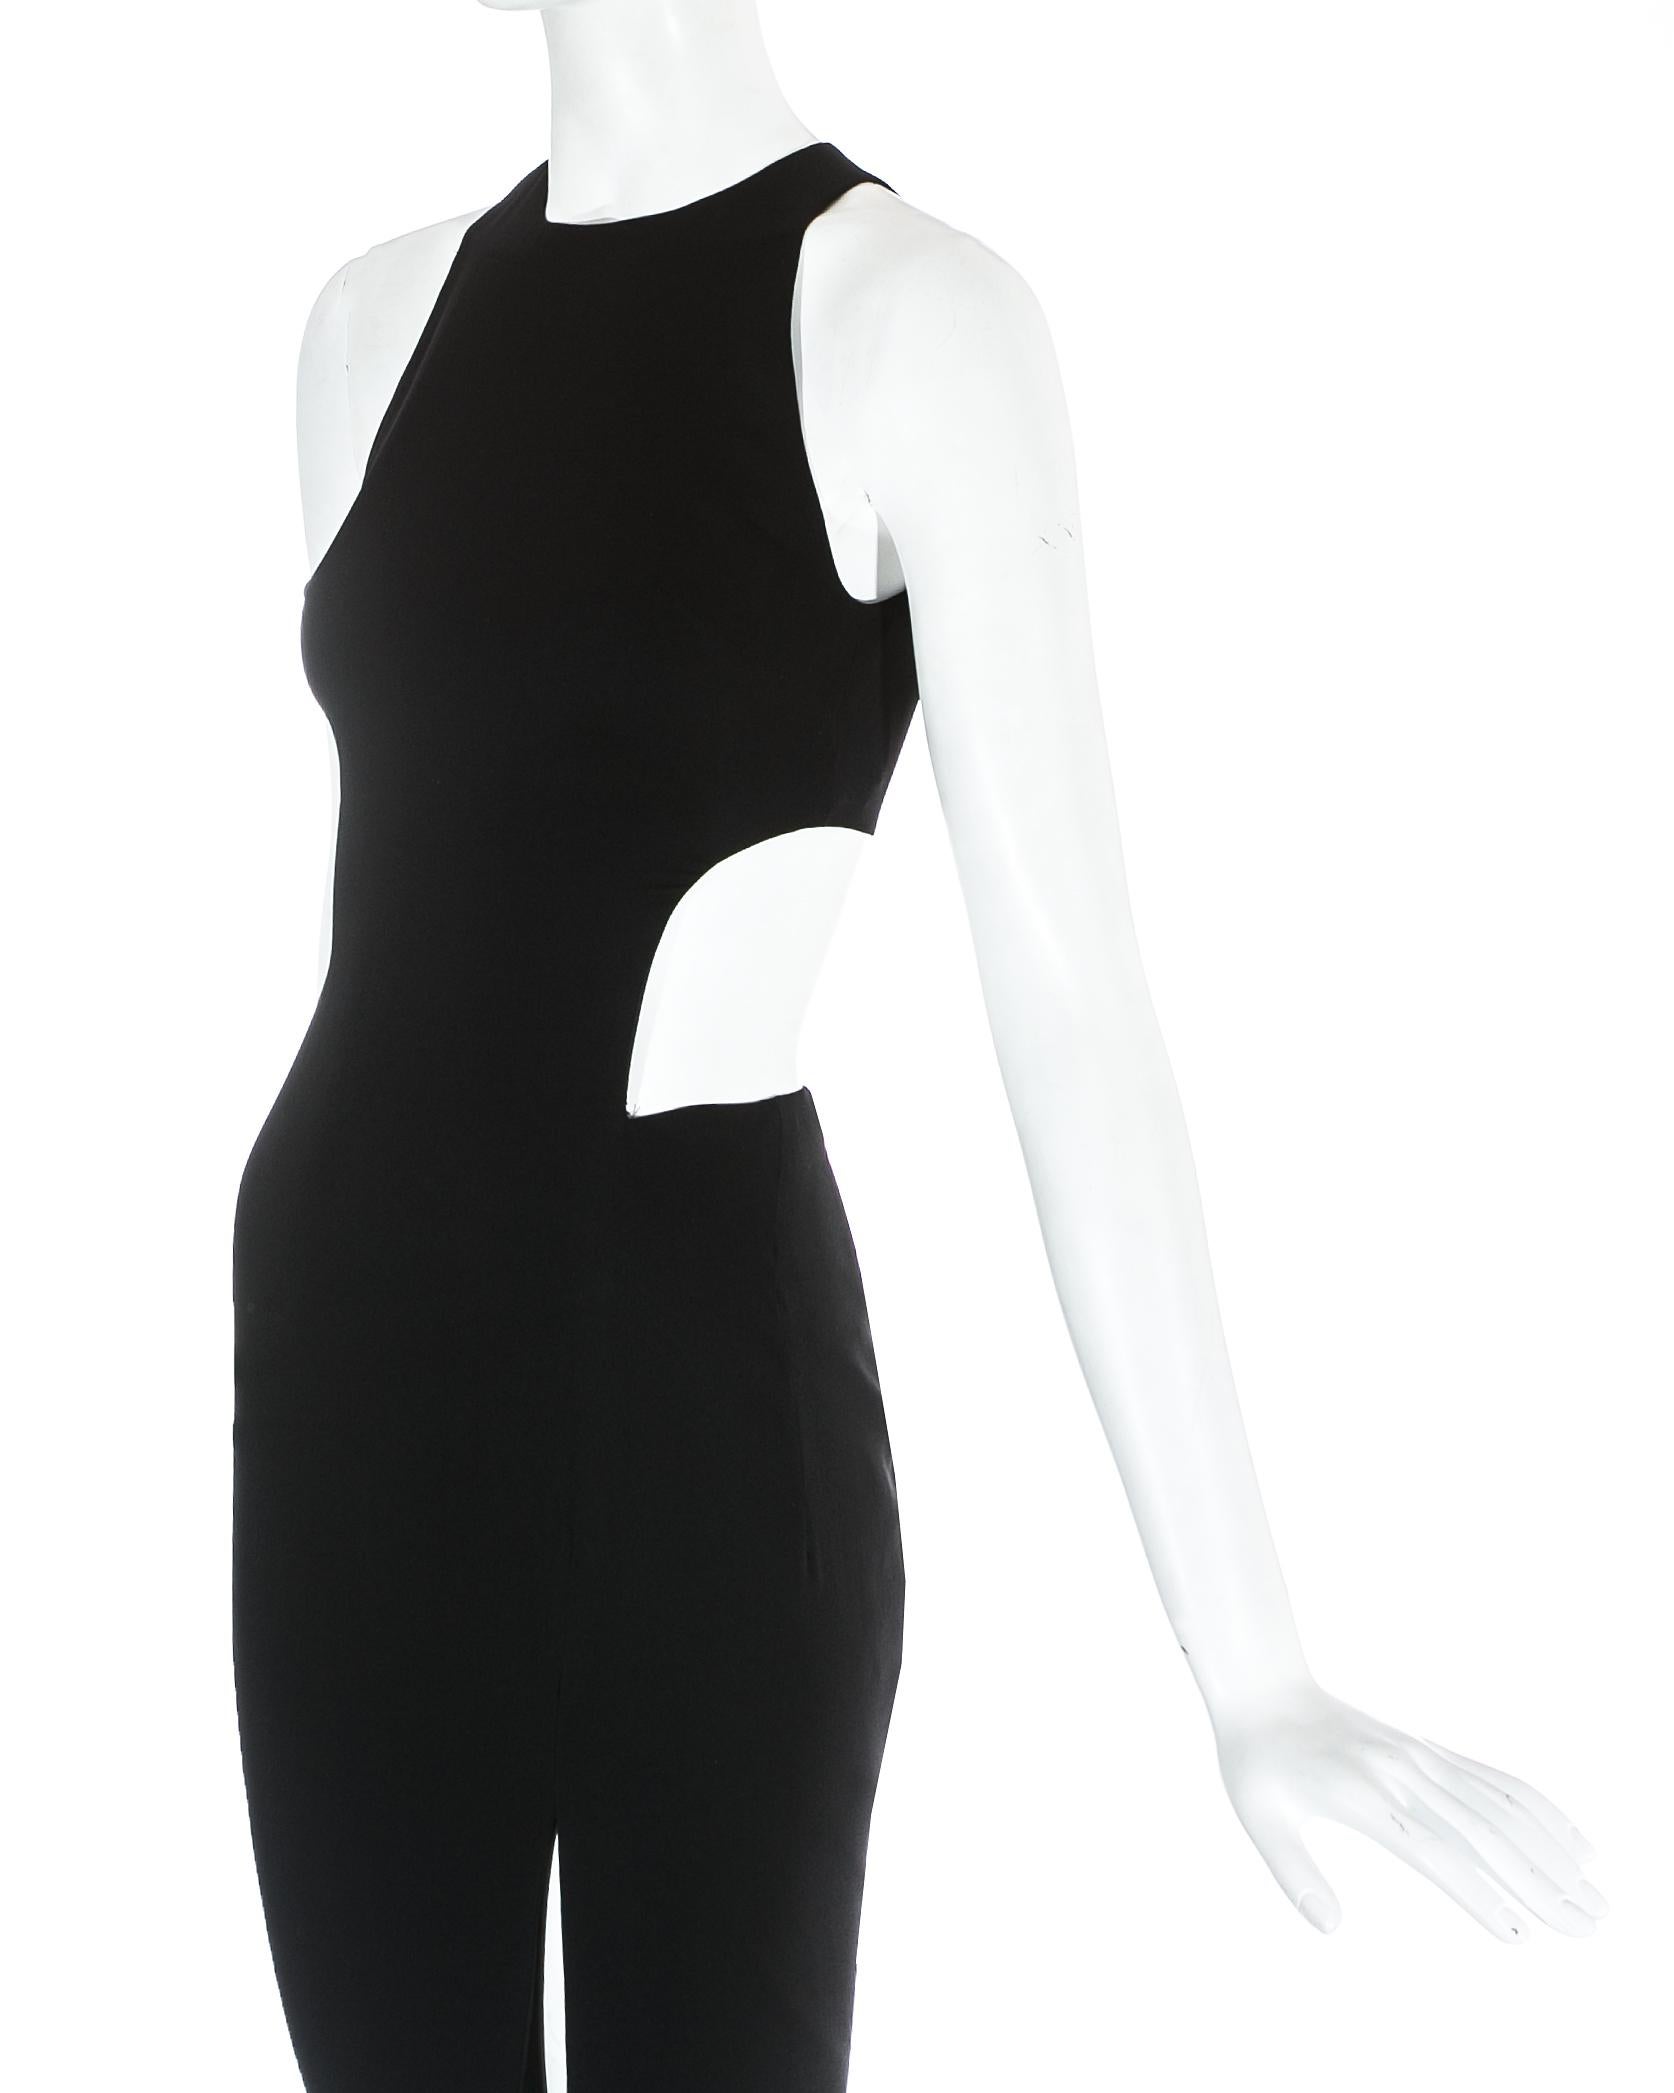 Gianni Versace black silk evening dress with cut out and leg slit, ss 1998 In Good Condition For Sale In London, London